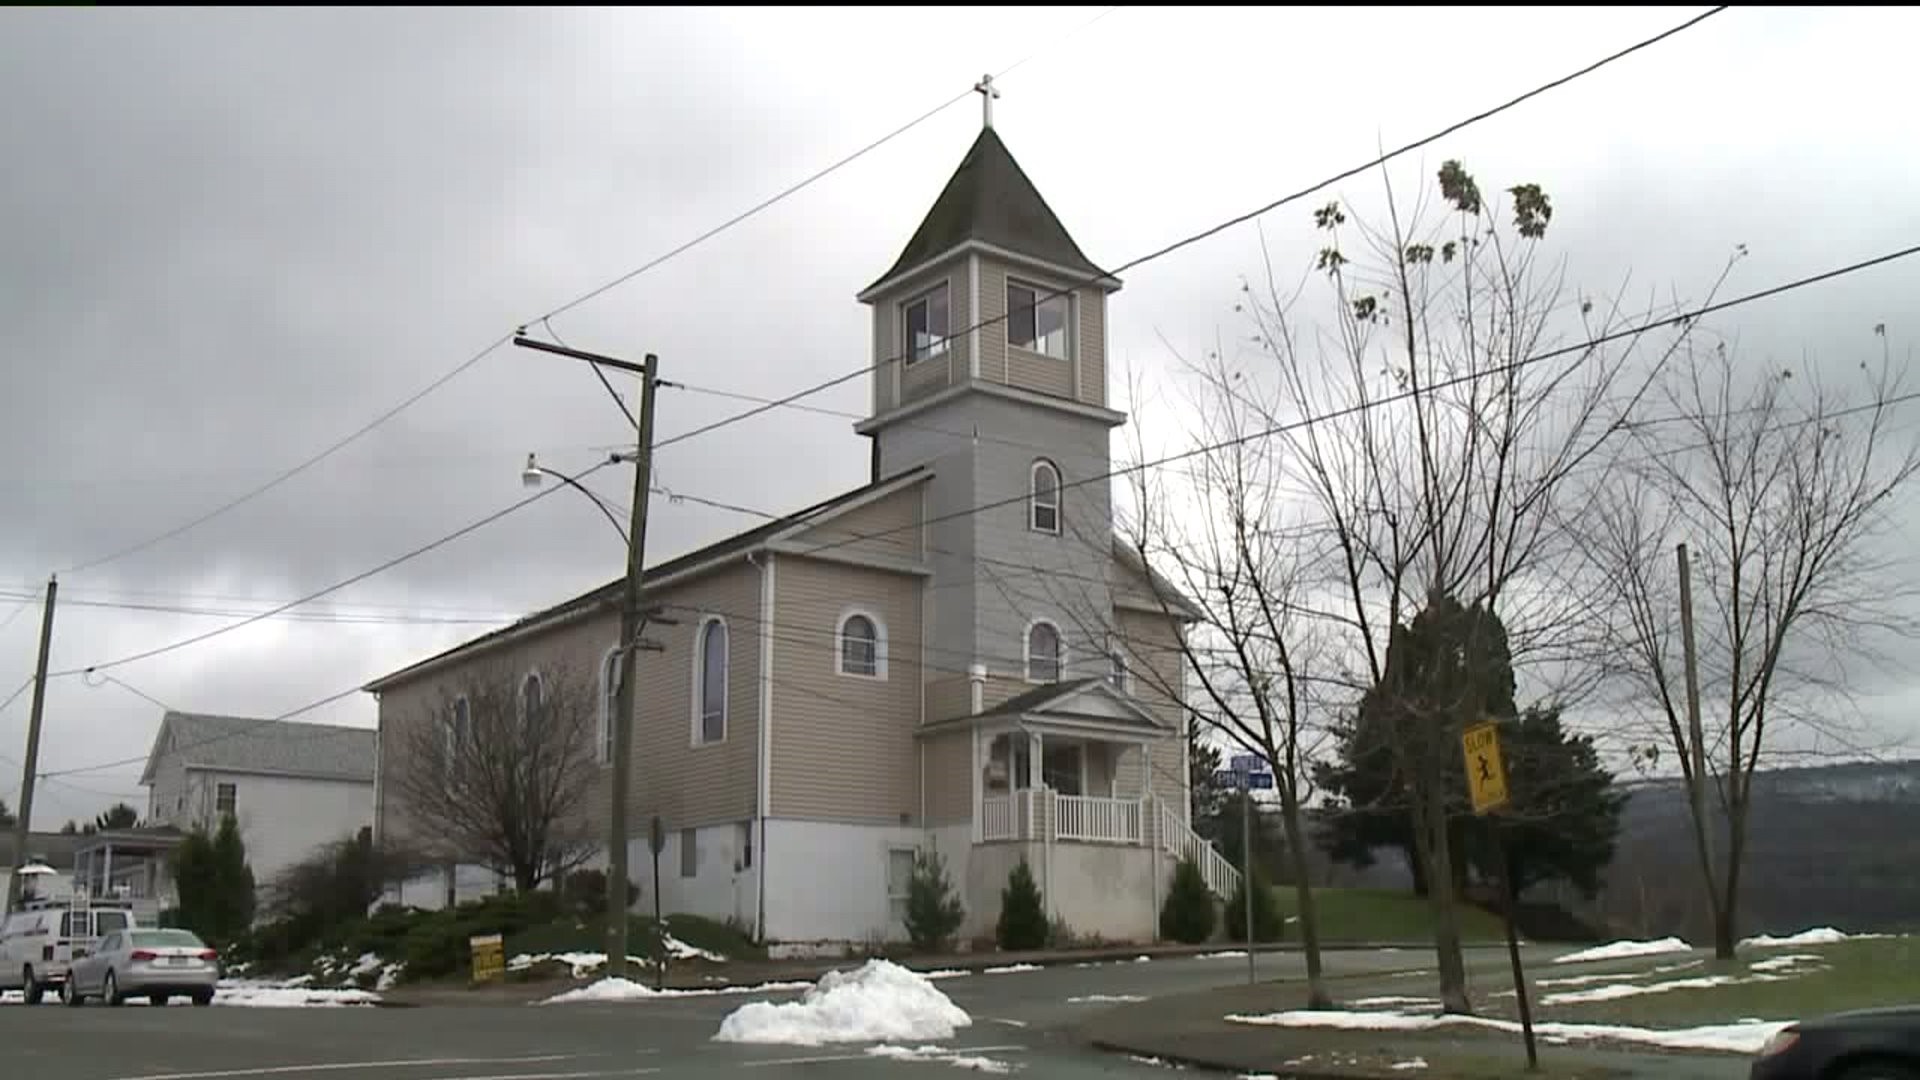 Century-old Church Renovated into Home for Sale in Nanticoke